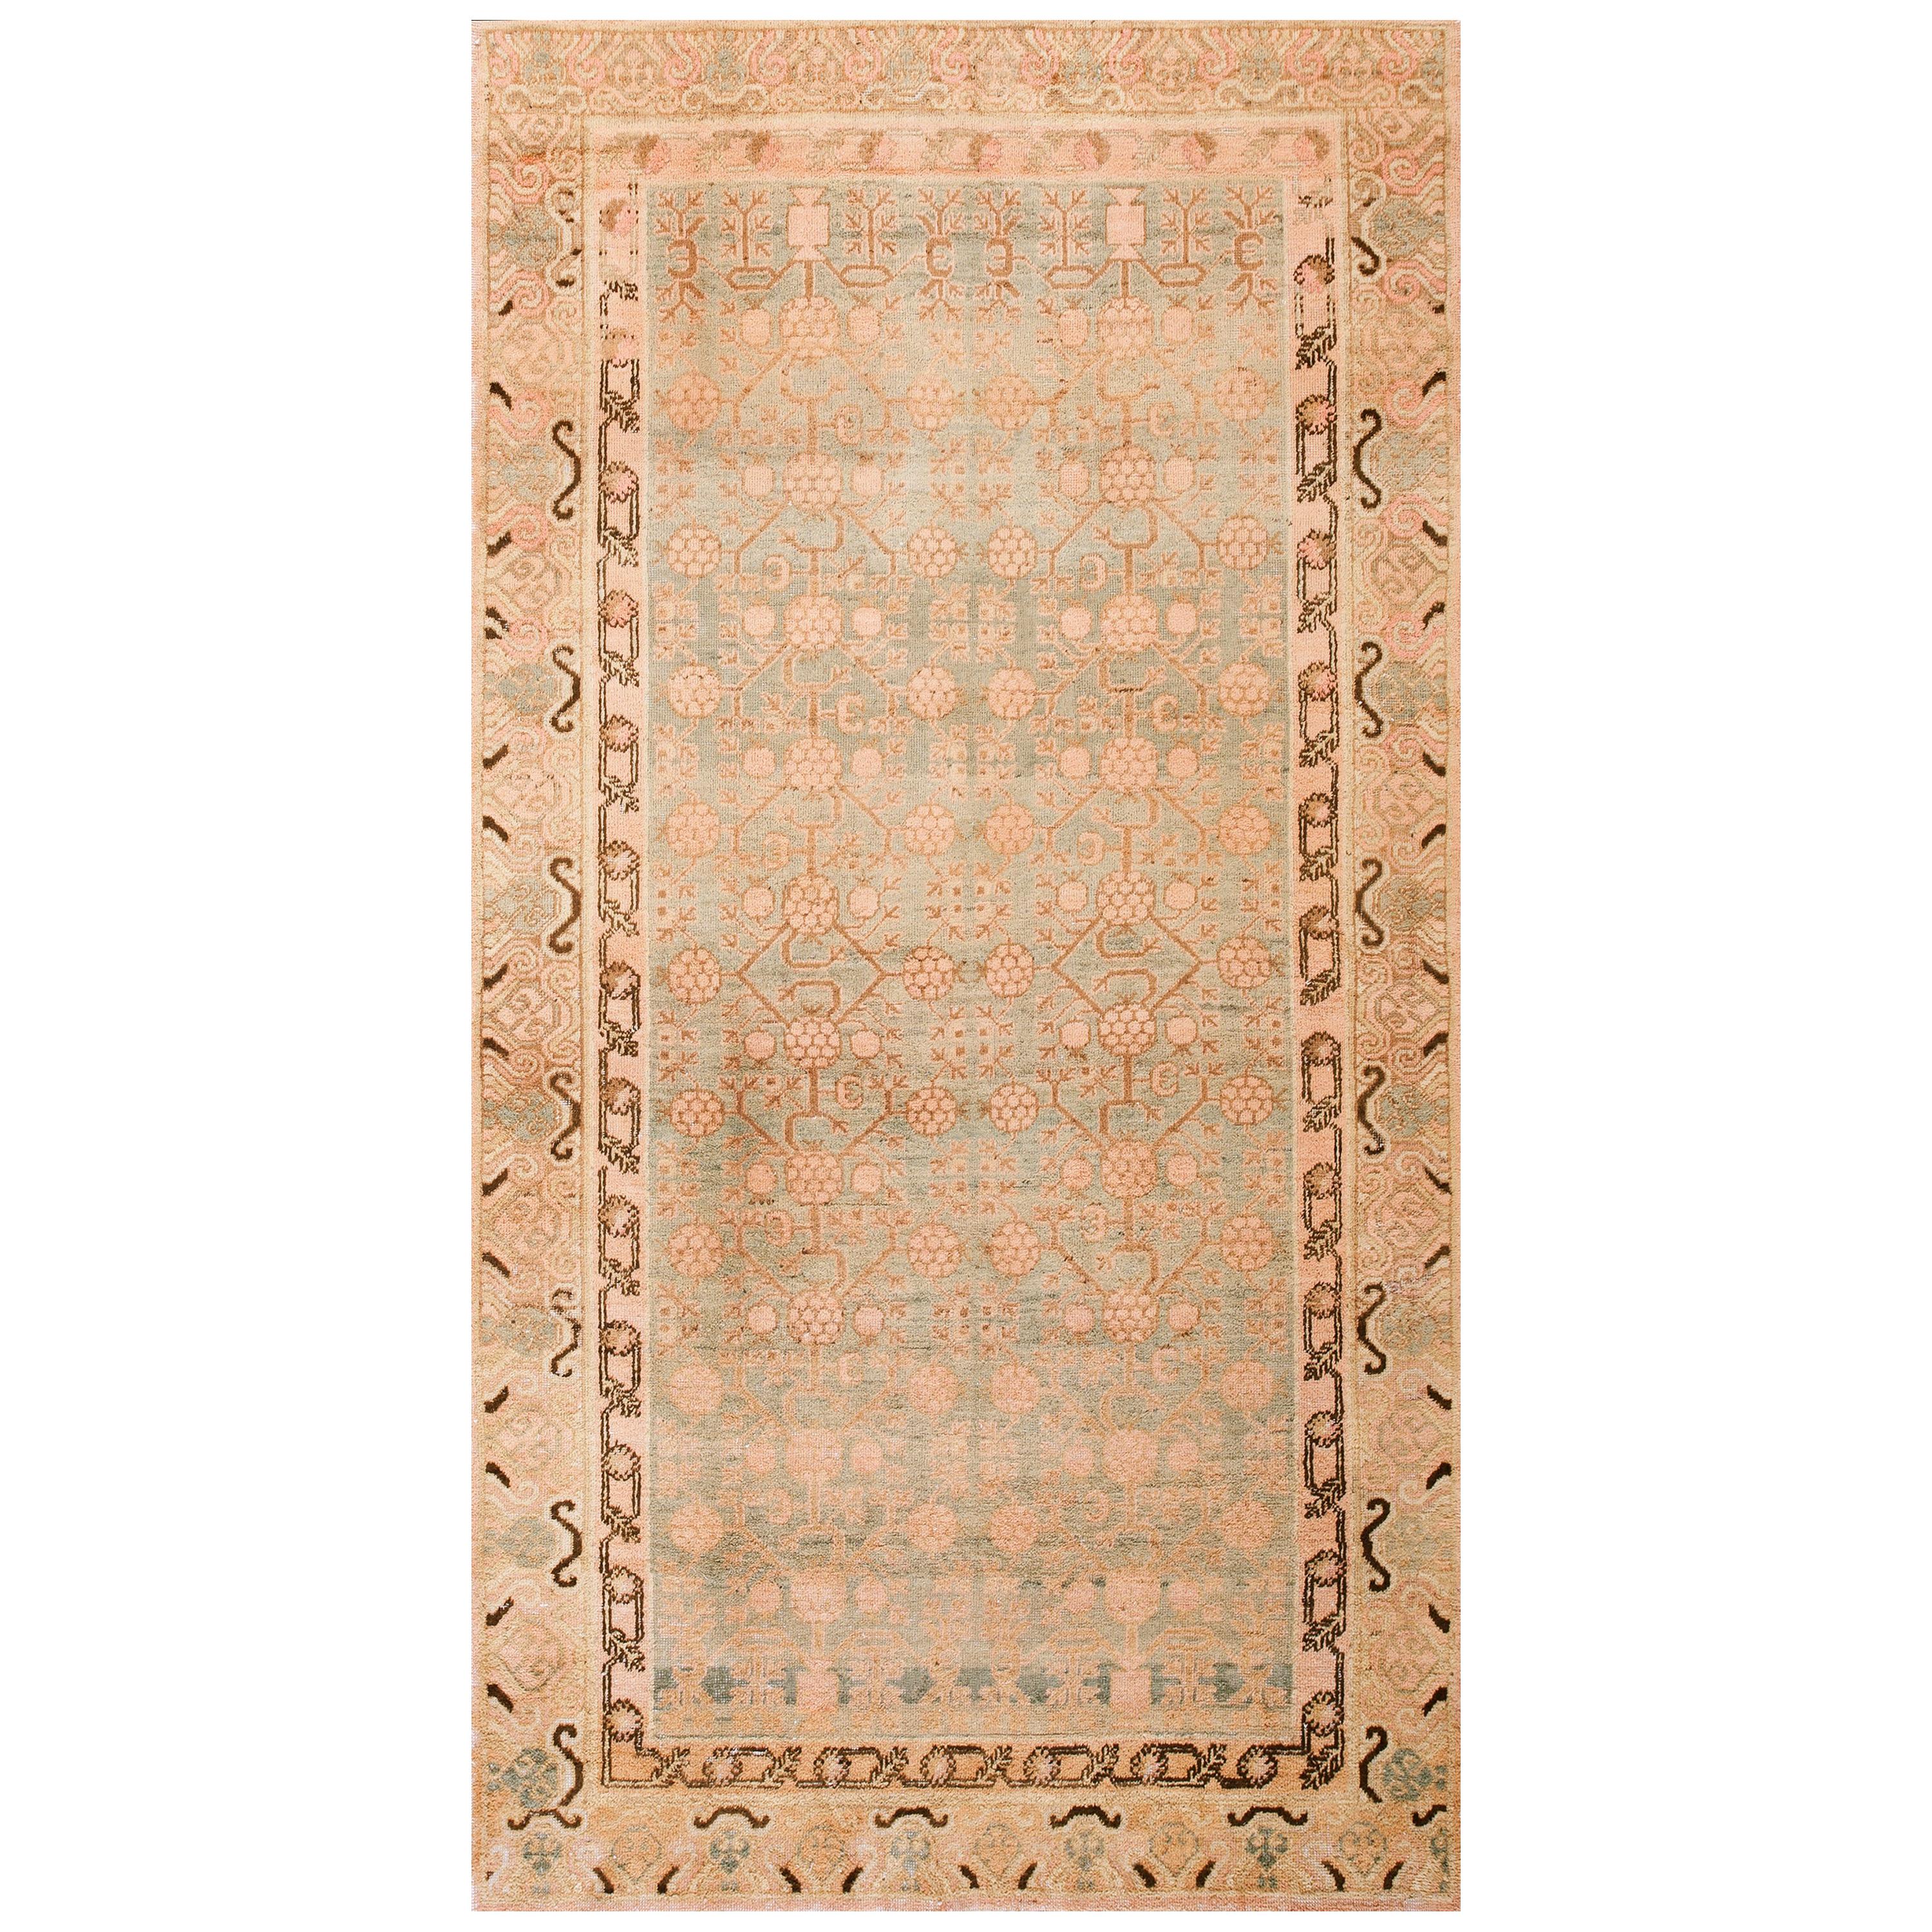 Early 20th Century Central Asian Chinese Khotan Carpet (5'6" x 10'6" -168 x 320) For Sale